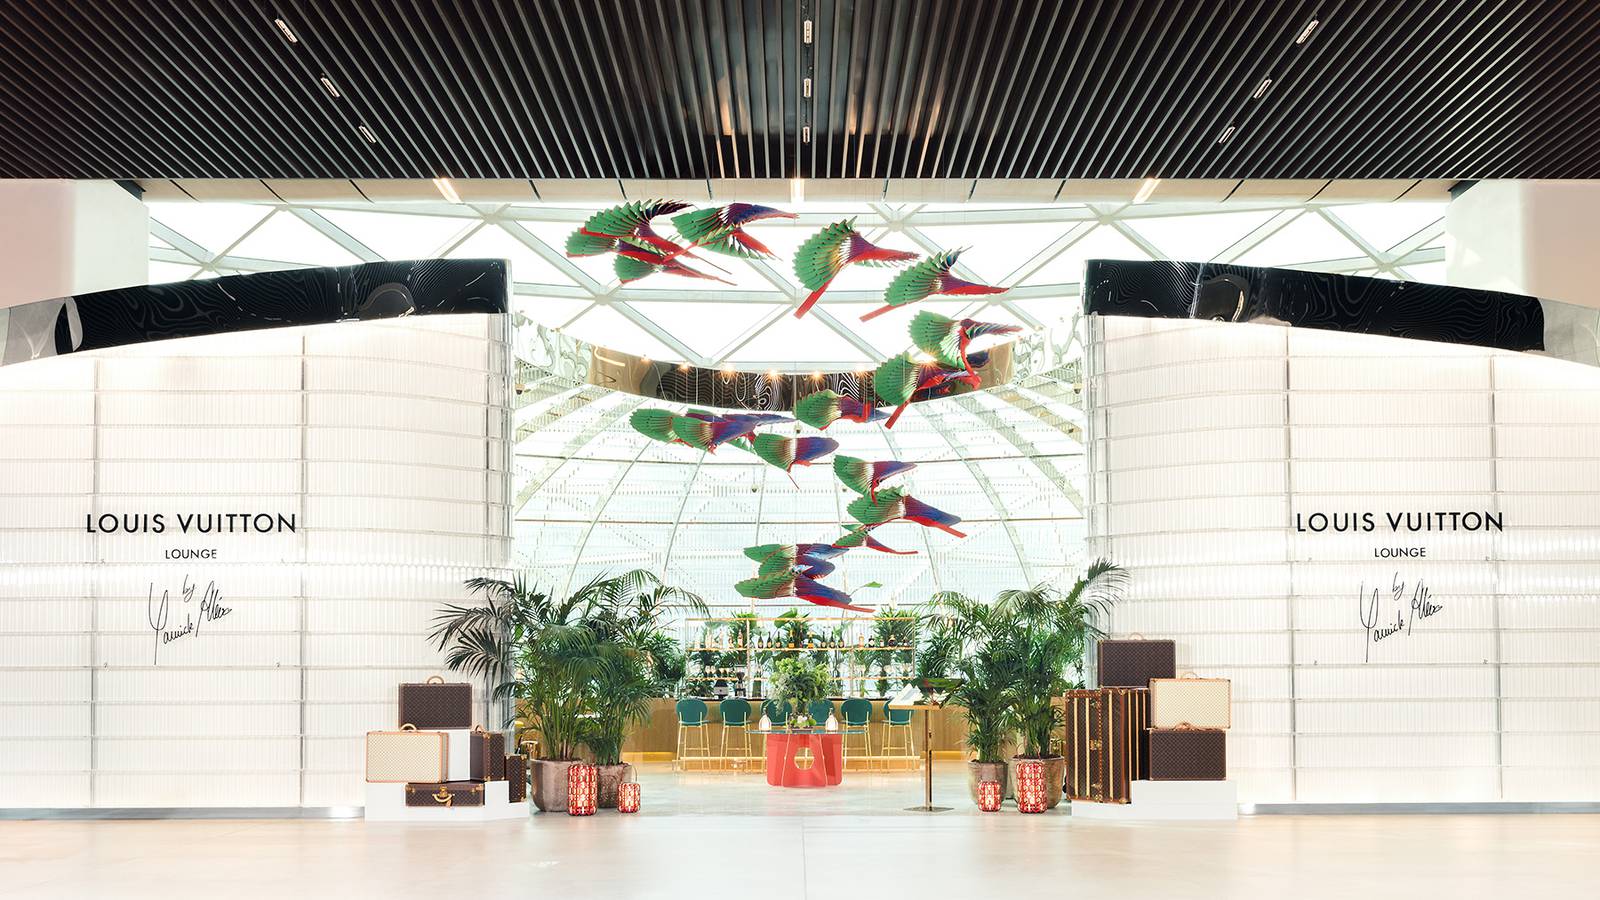 Louis Vuitton lounge opens at Qatar's Hamad International Airport